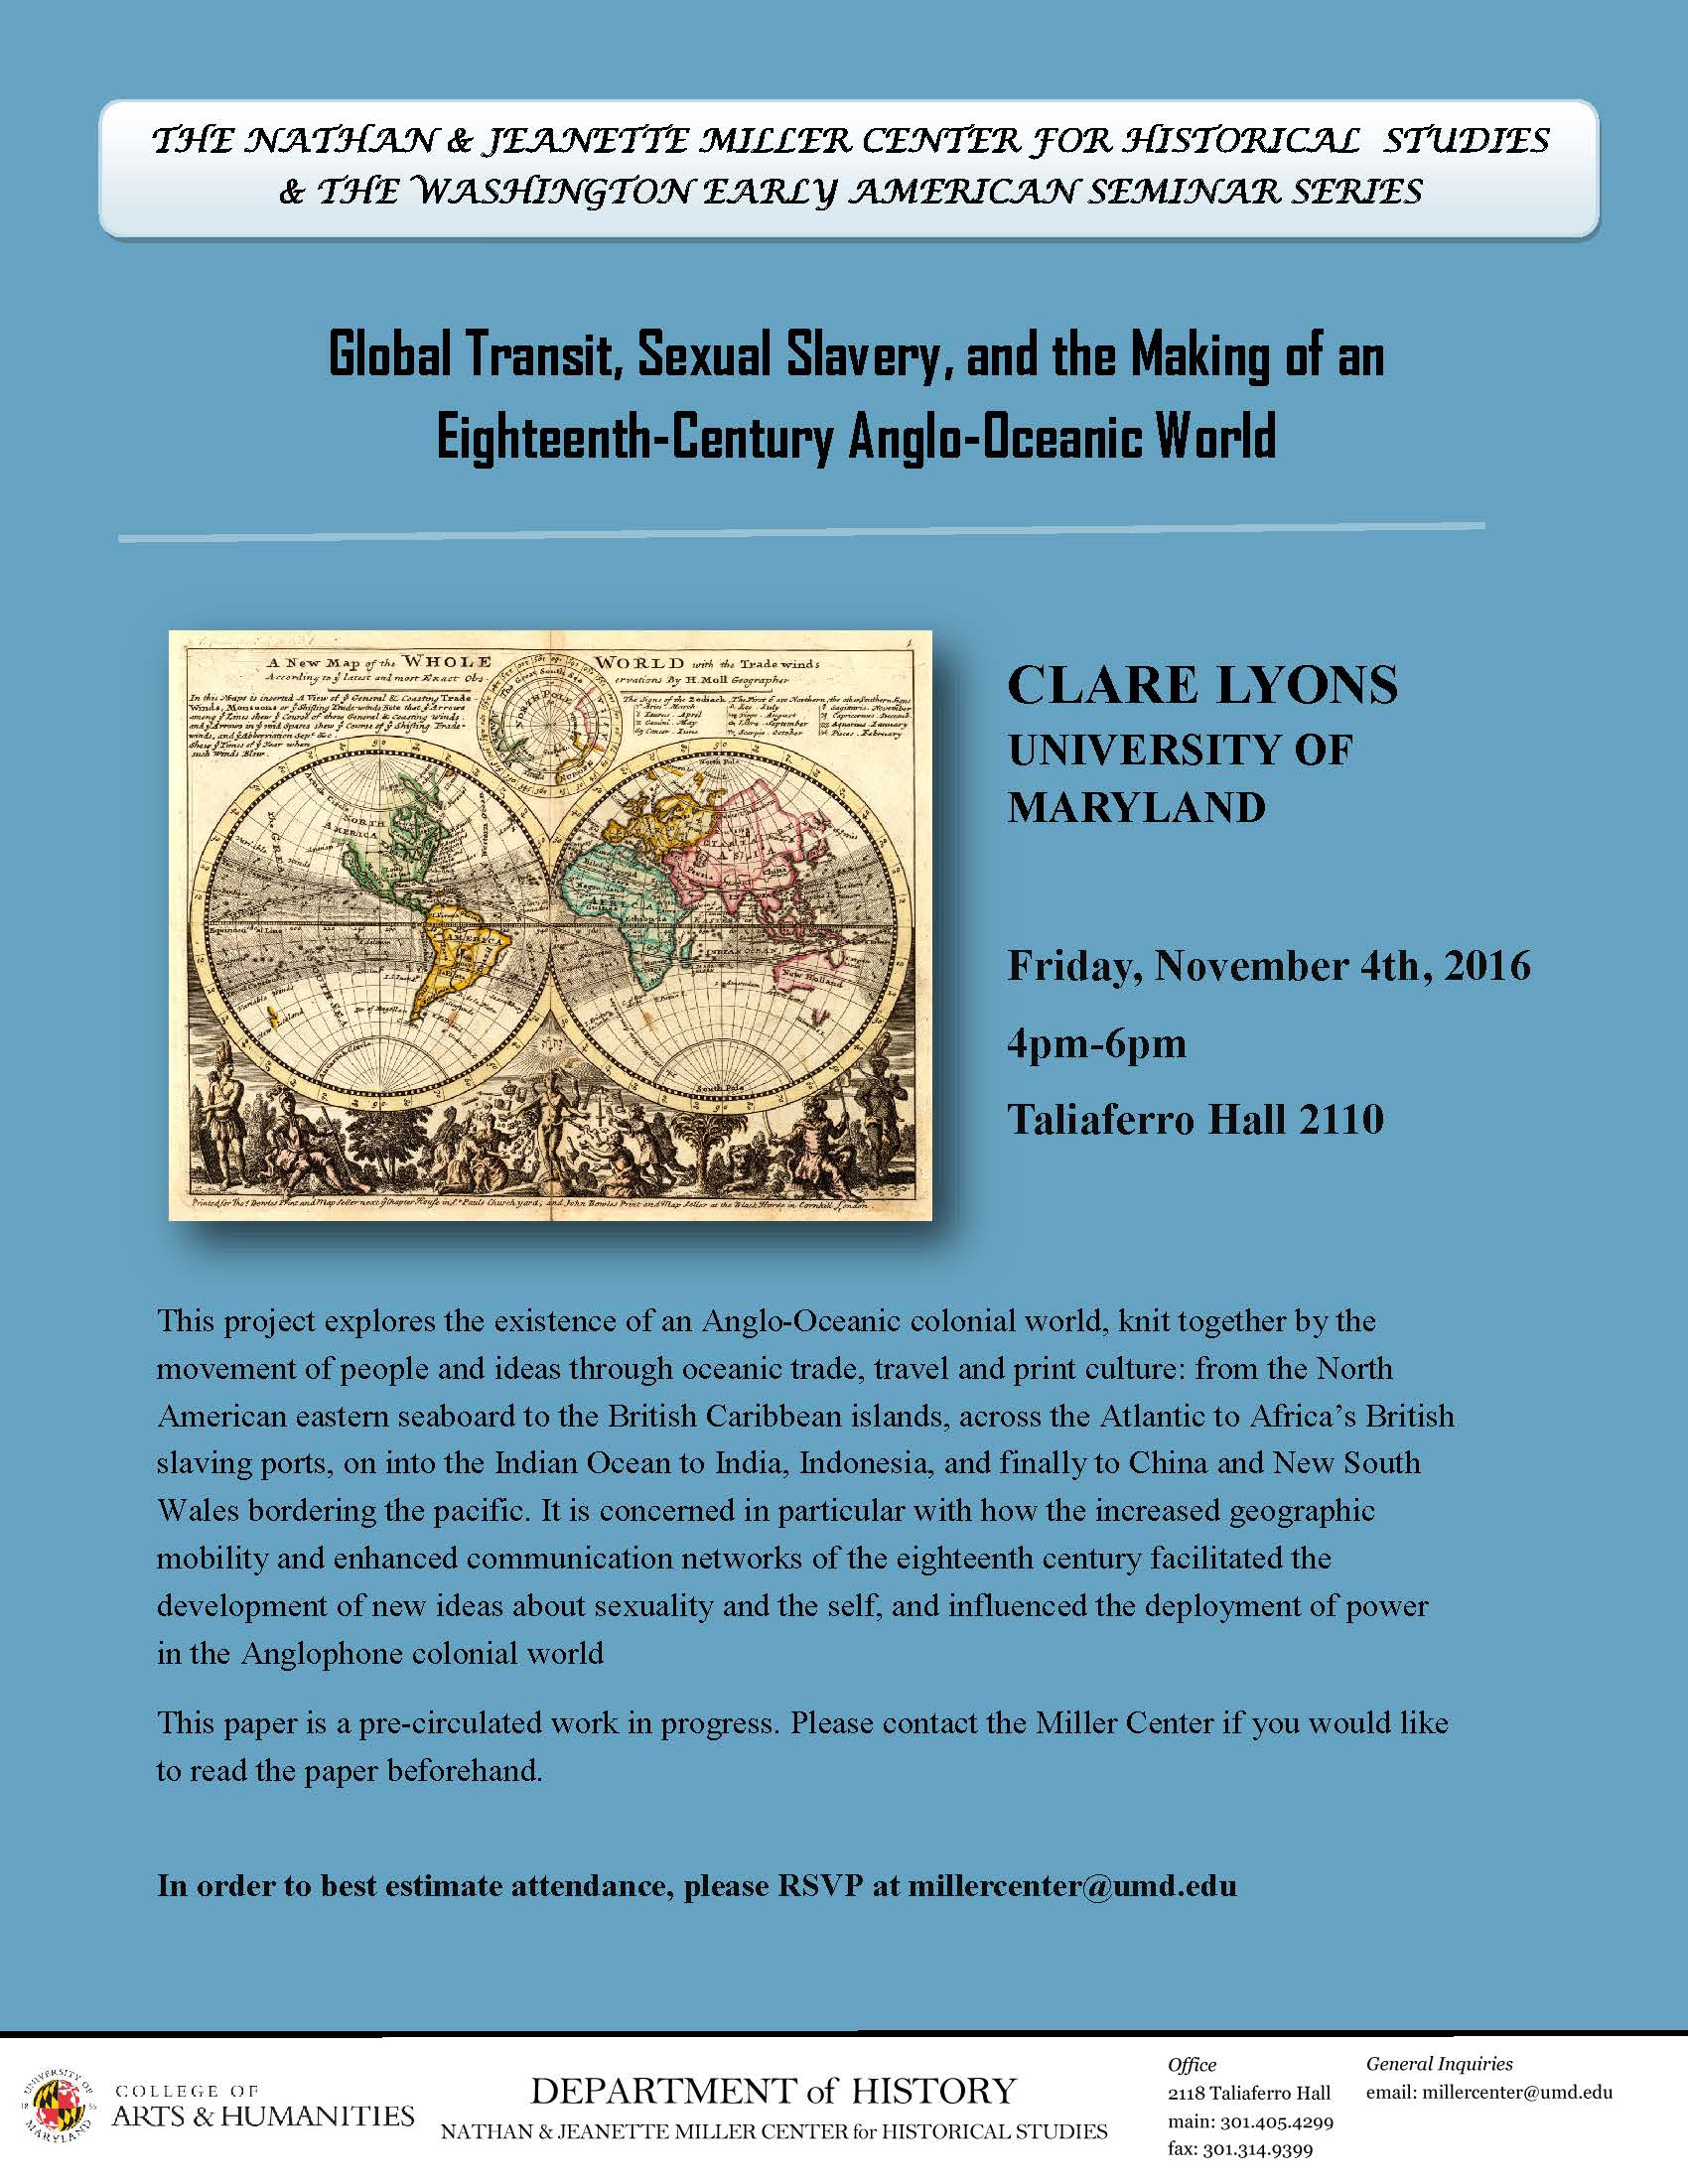 Image for event - "Global Transit, Sexual Slavery, and the Making of an Eighteenth-Century Anglo-Oceanic World"